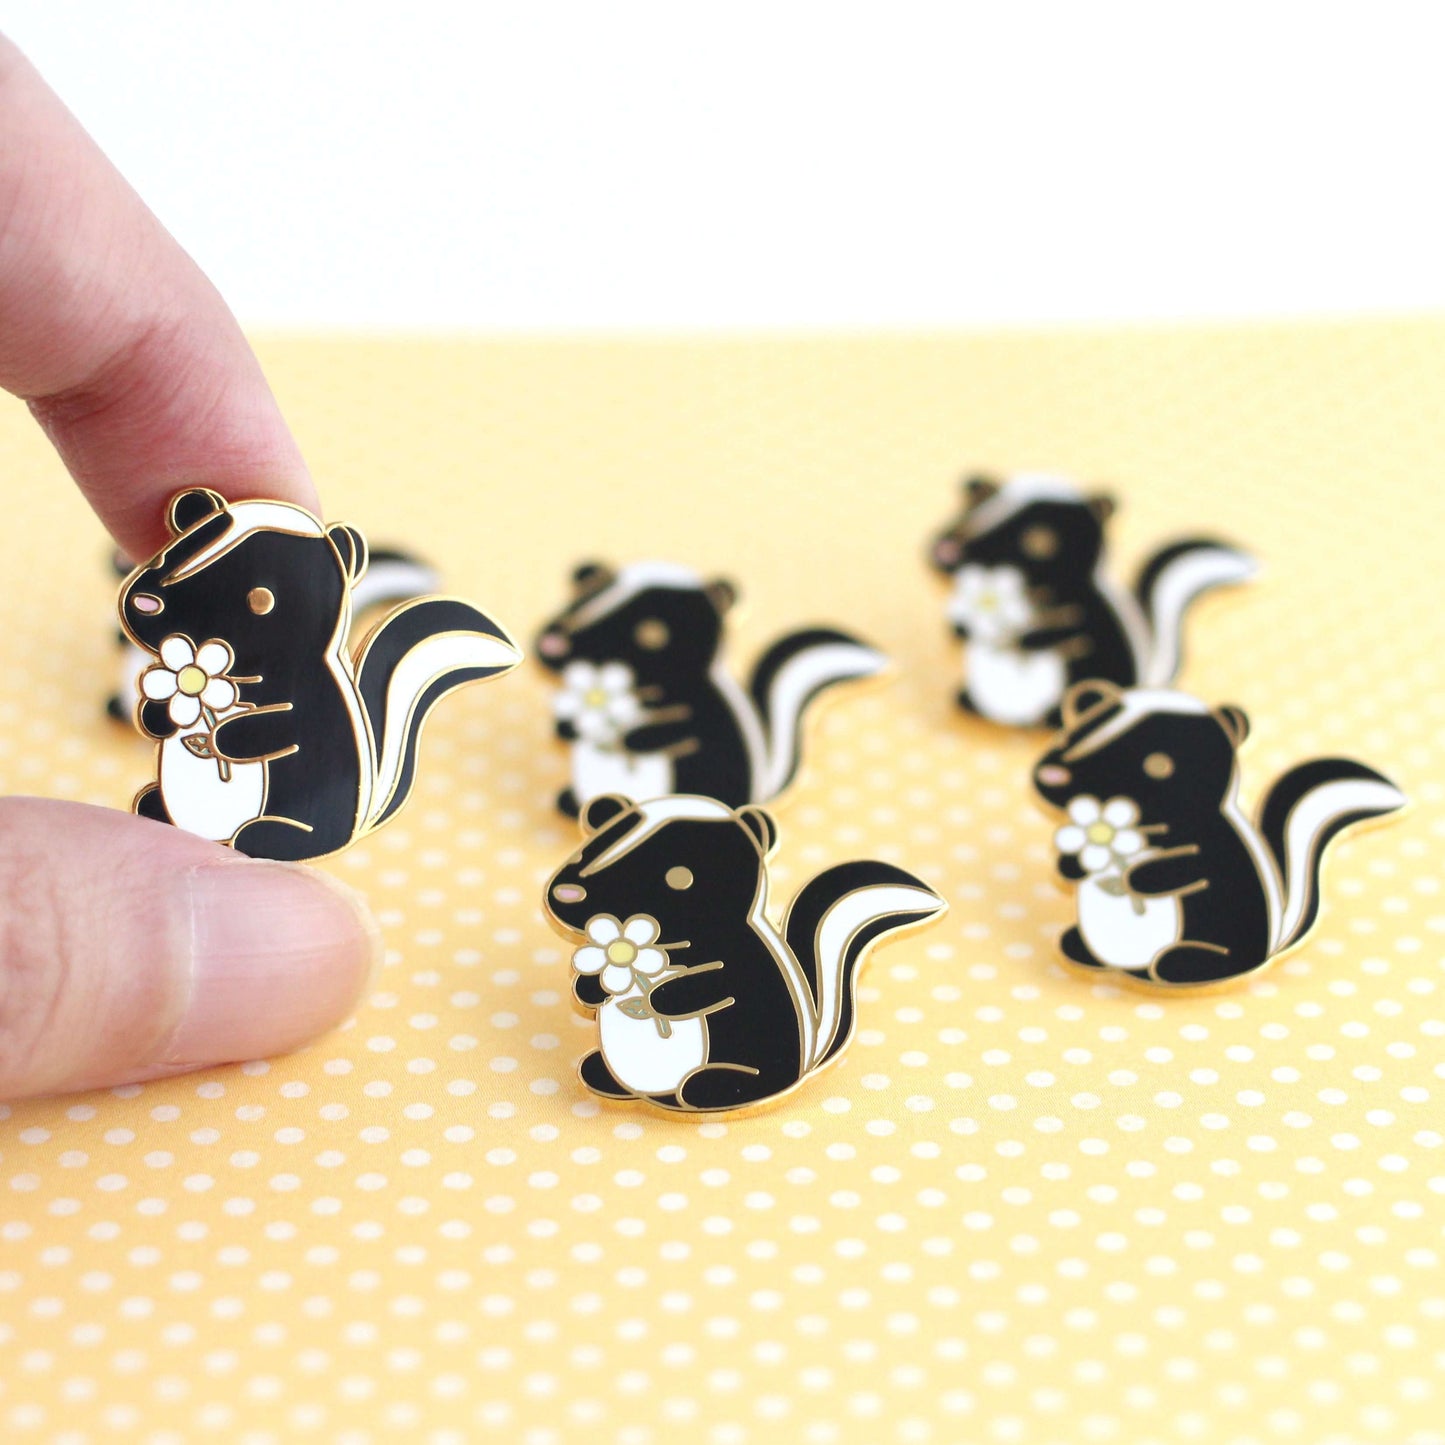 Skunk and Daisy Enamel Pin (Black Variant) - Cute Skunk Pin by Wild Whimsy Woolies